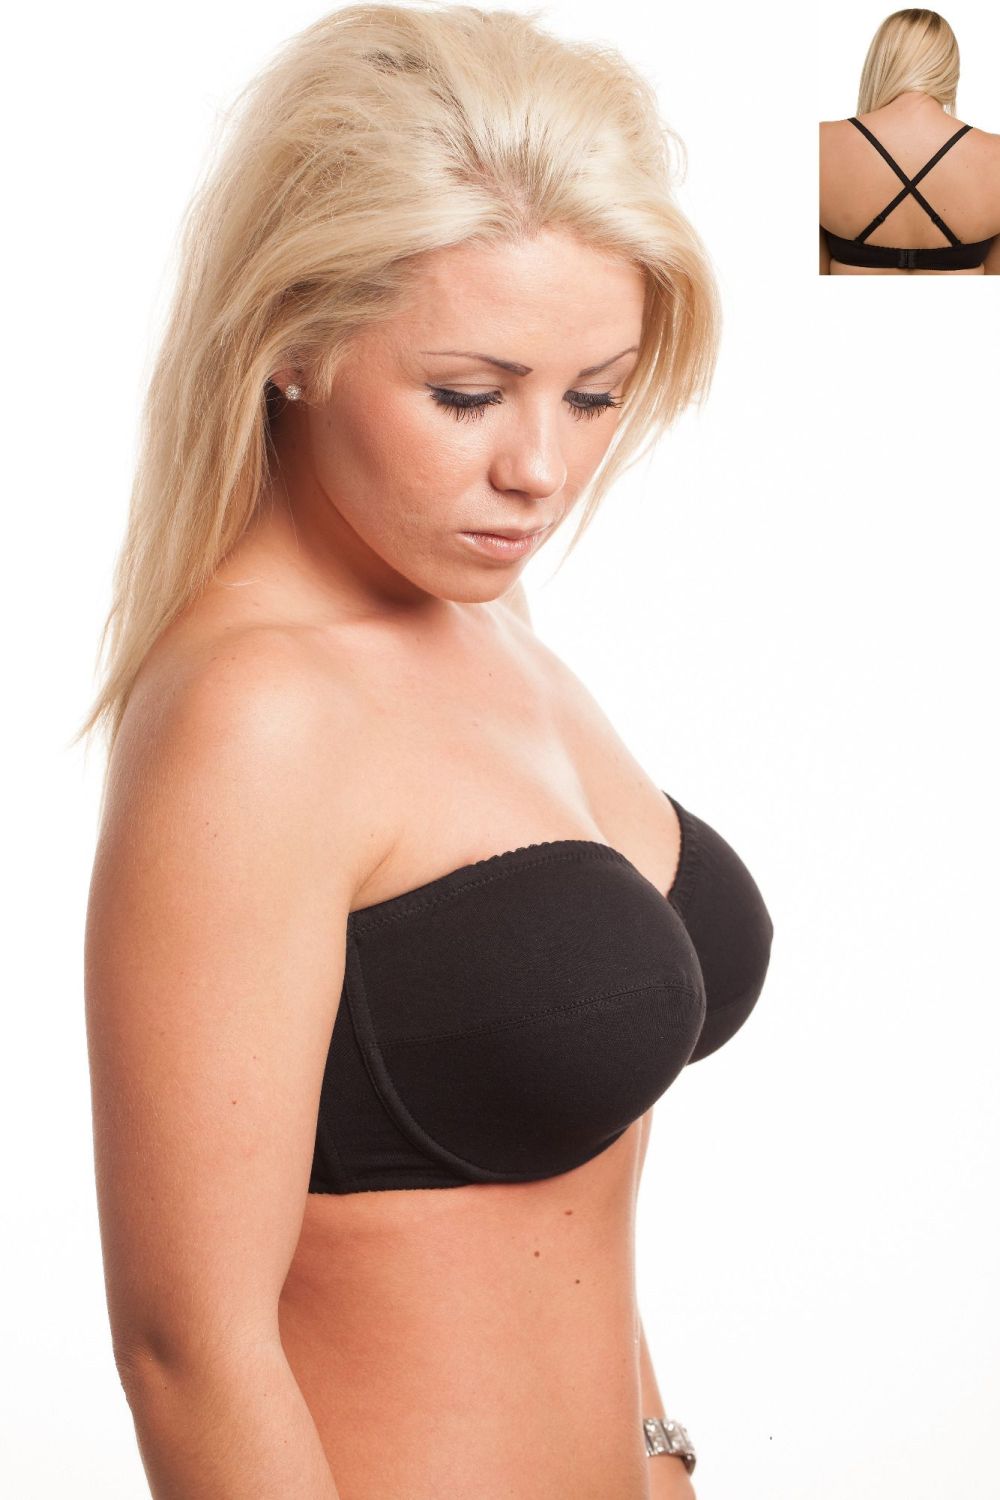 MW295 - 30 COTTON Strapless Bras - only £3.60 Each